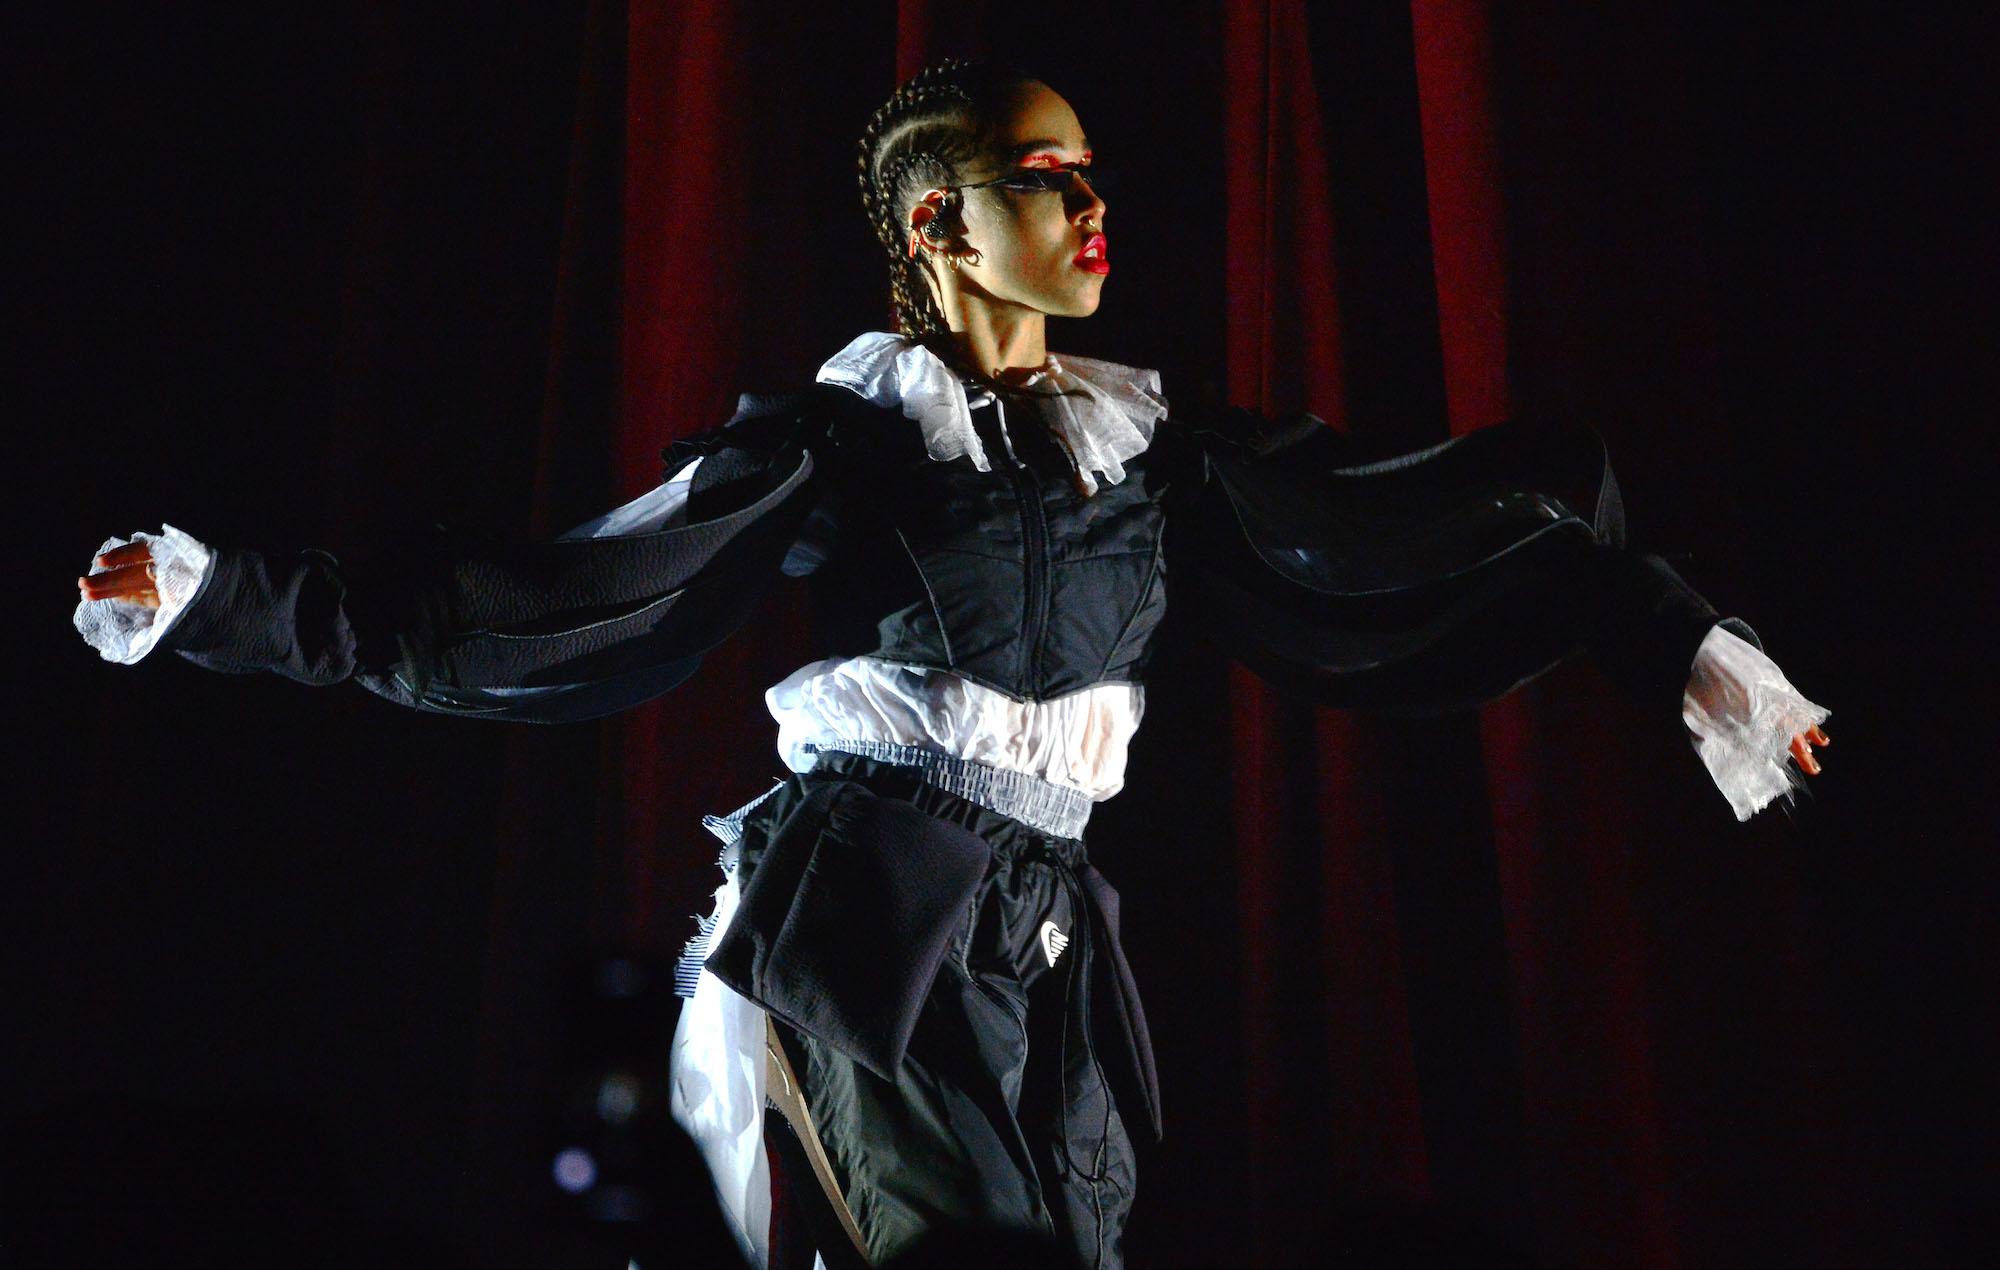 Watch FKA twigs in training for beautiful 'Cellophane' video in new